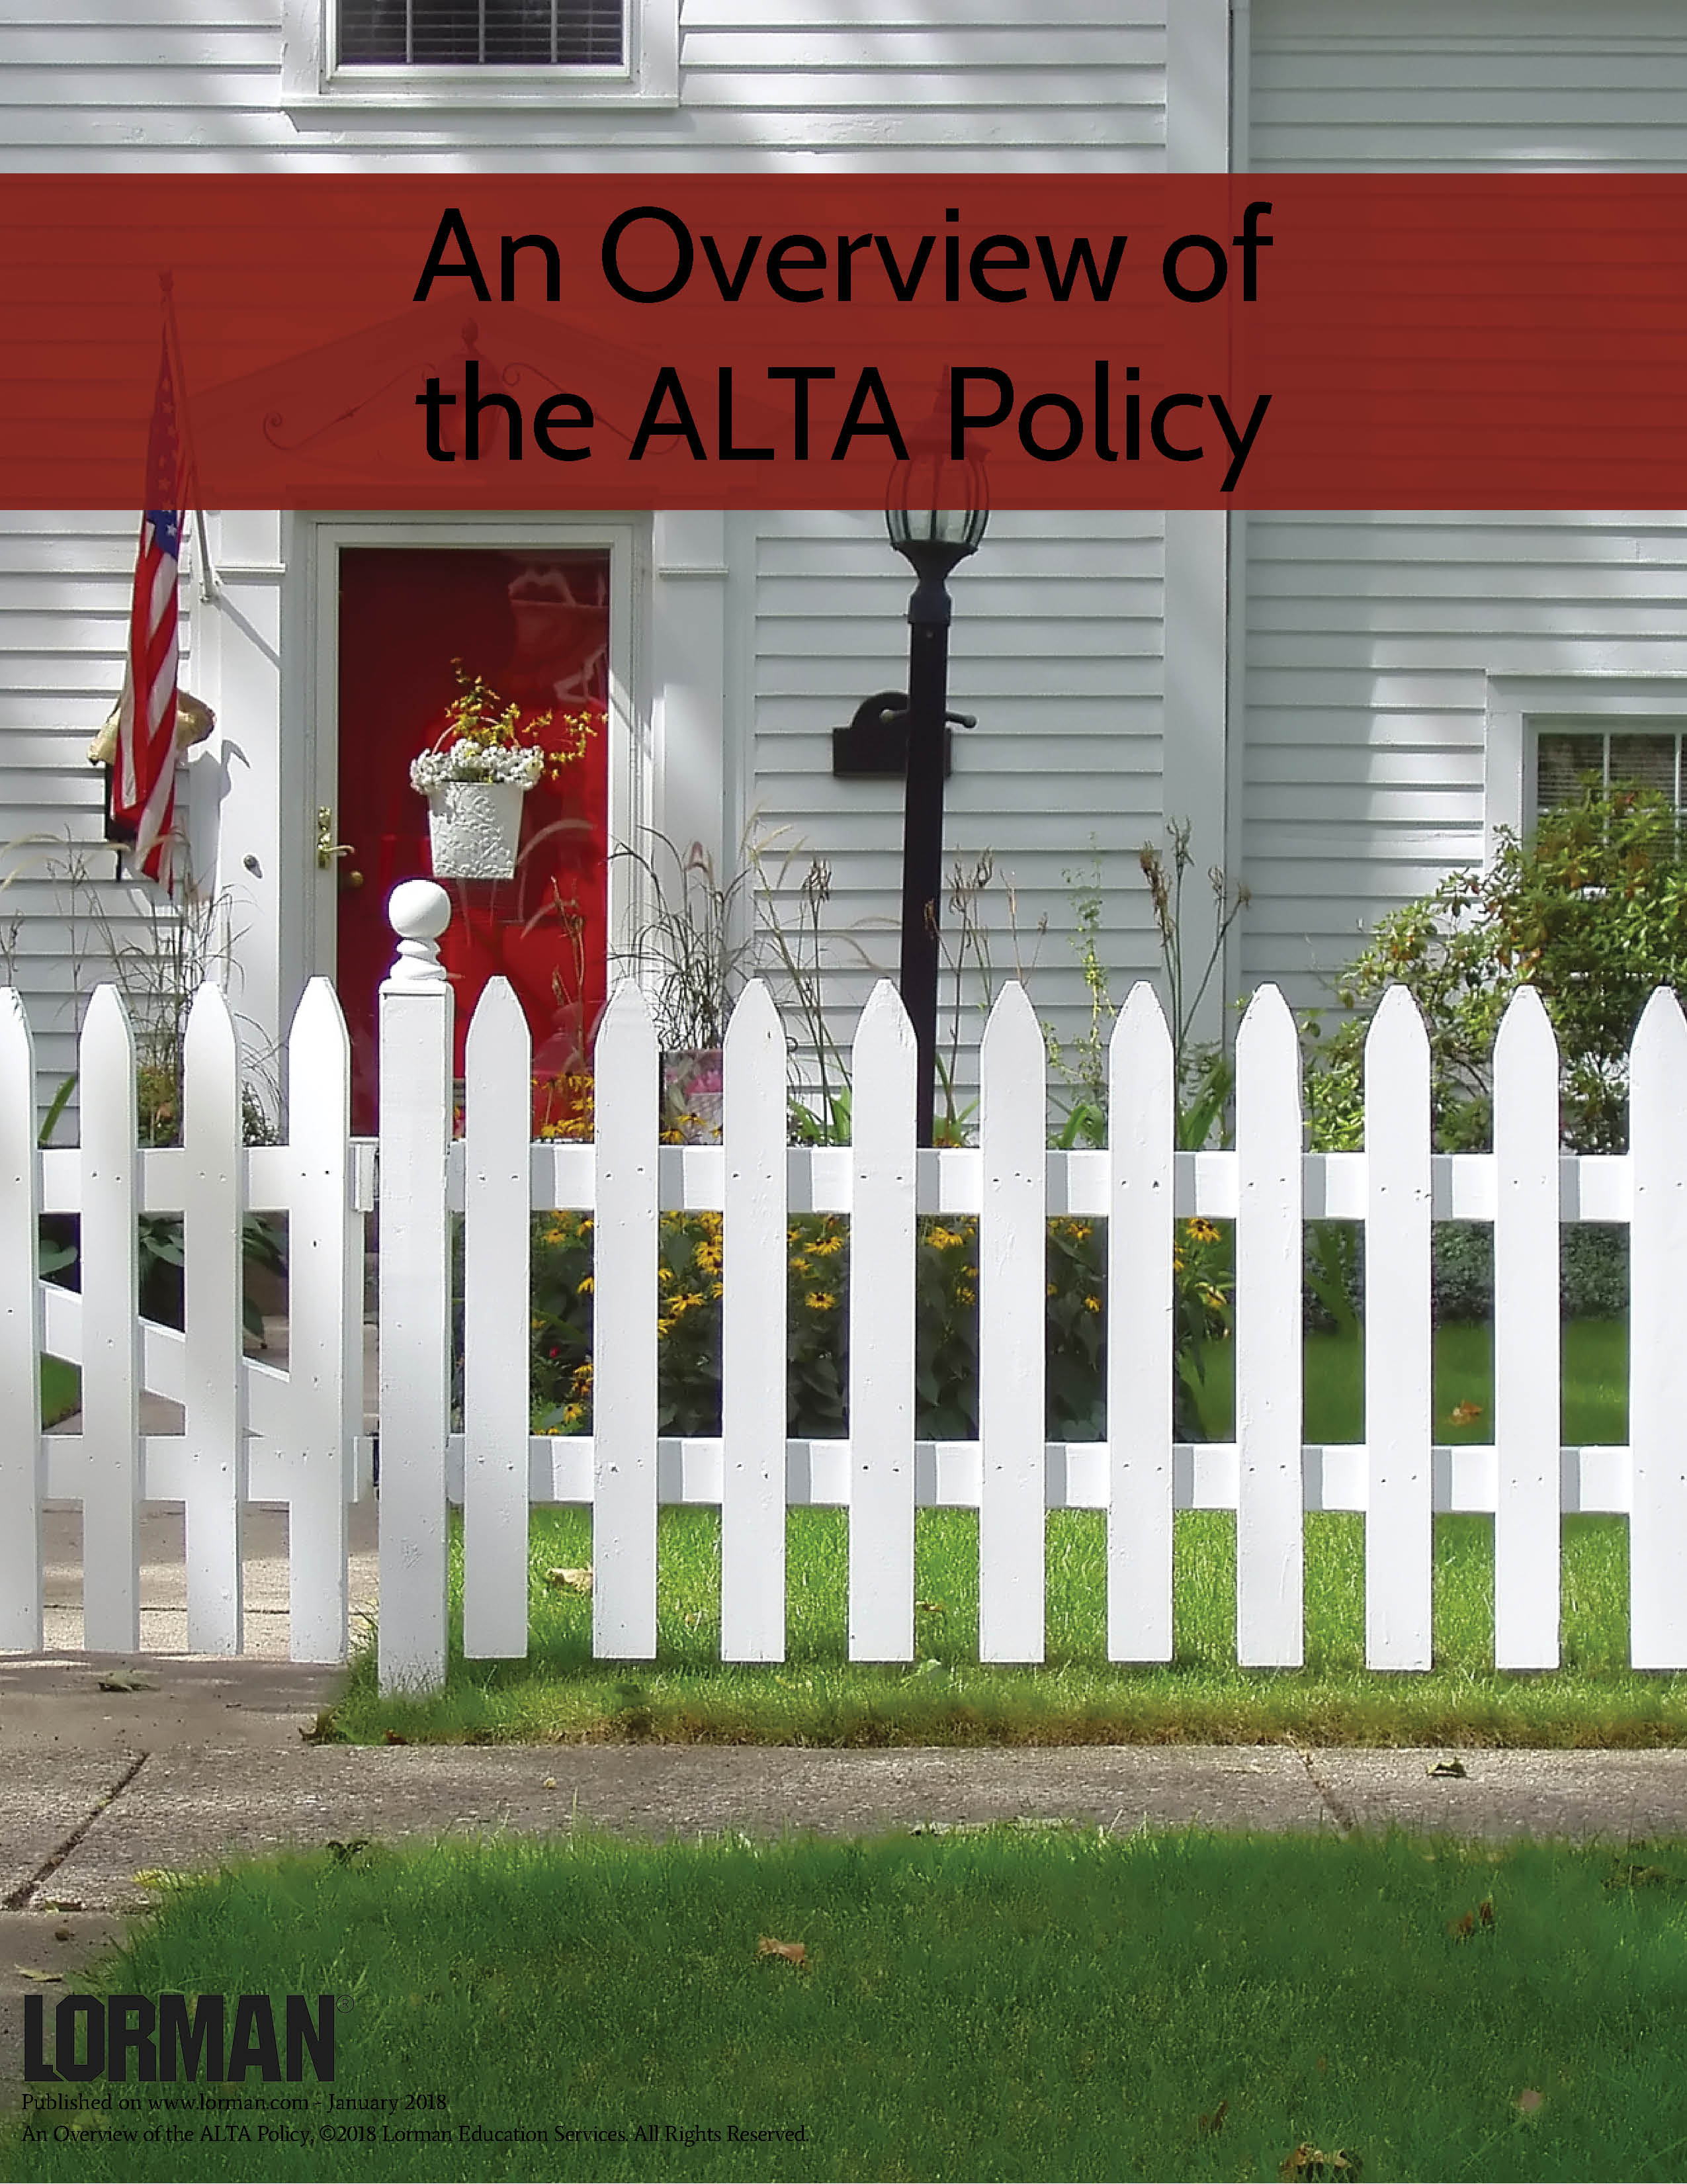 An Overview of the ALTA Policy